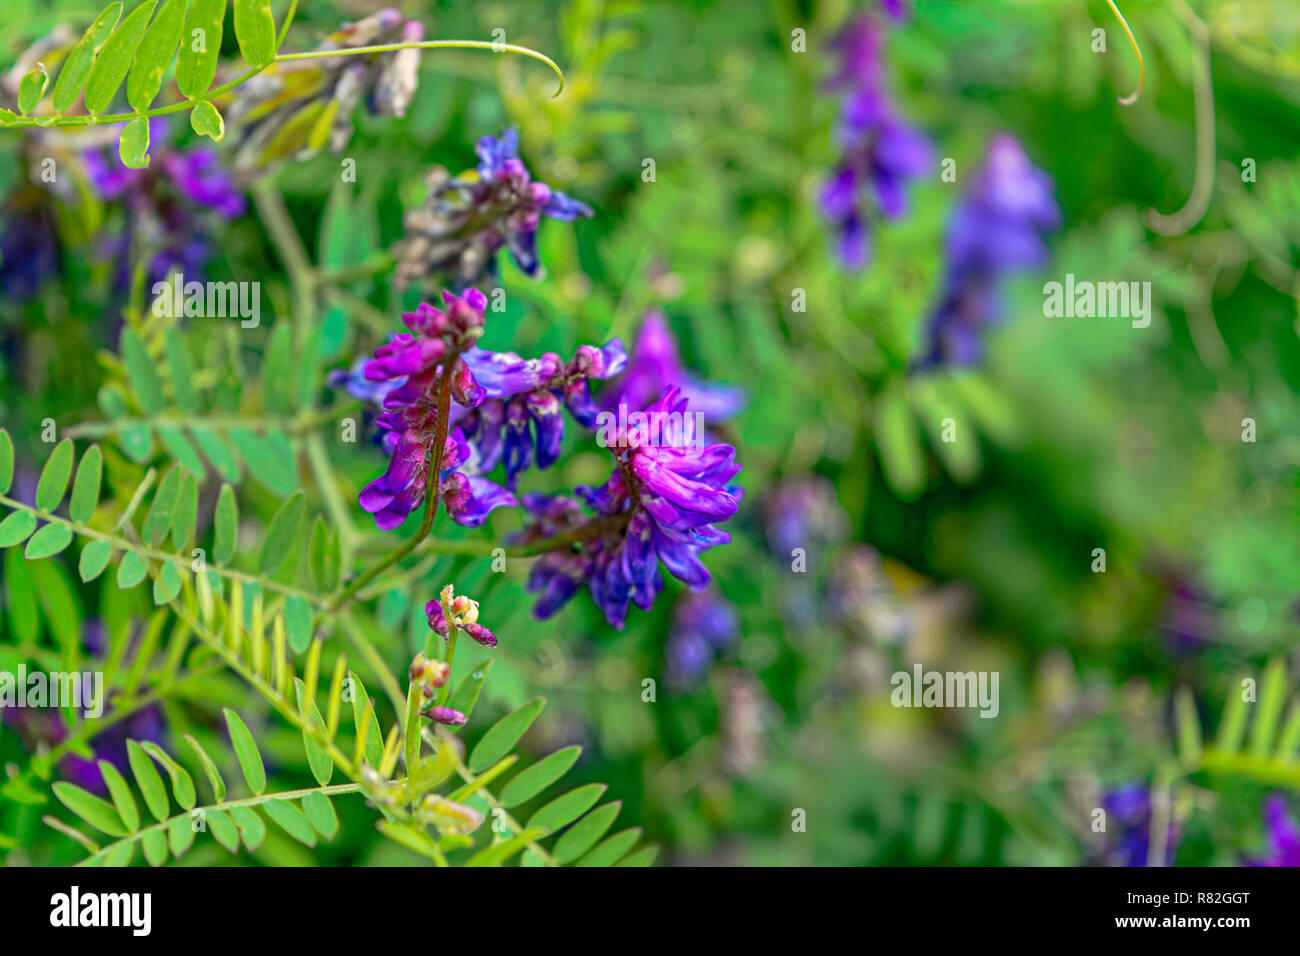 Tufted vetch Vicia cracca purple wild flower blooming in a forest close-up Stock Photo